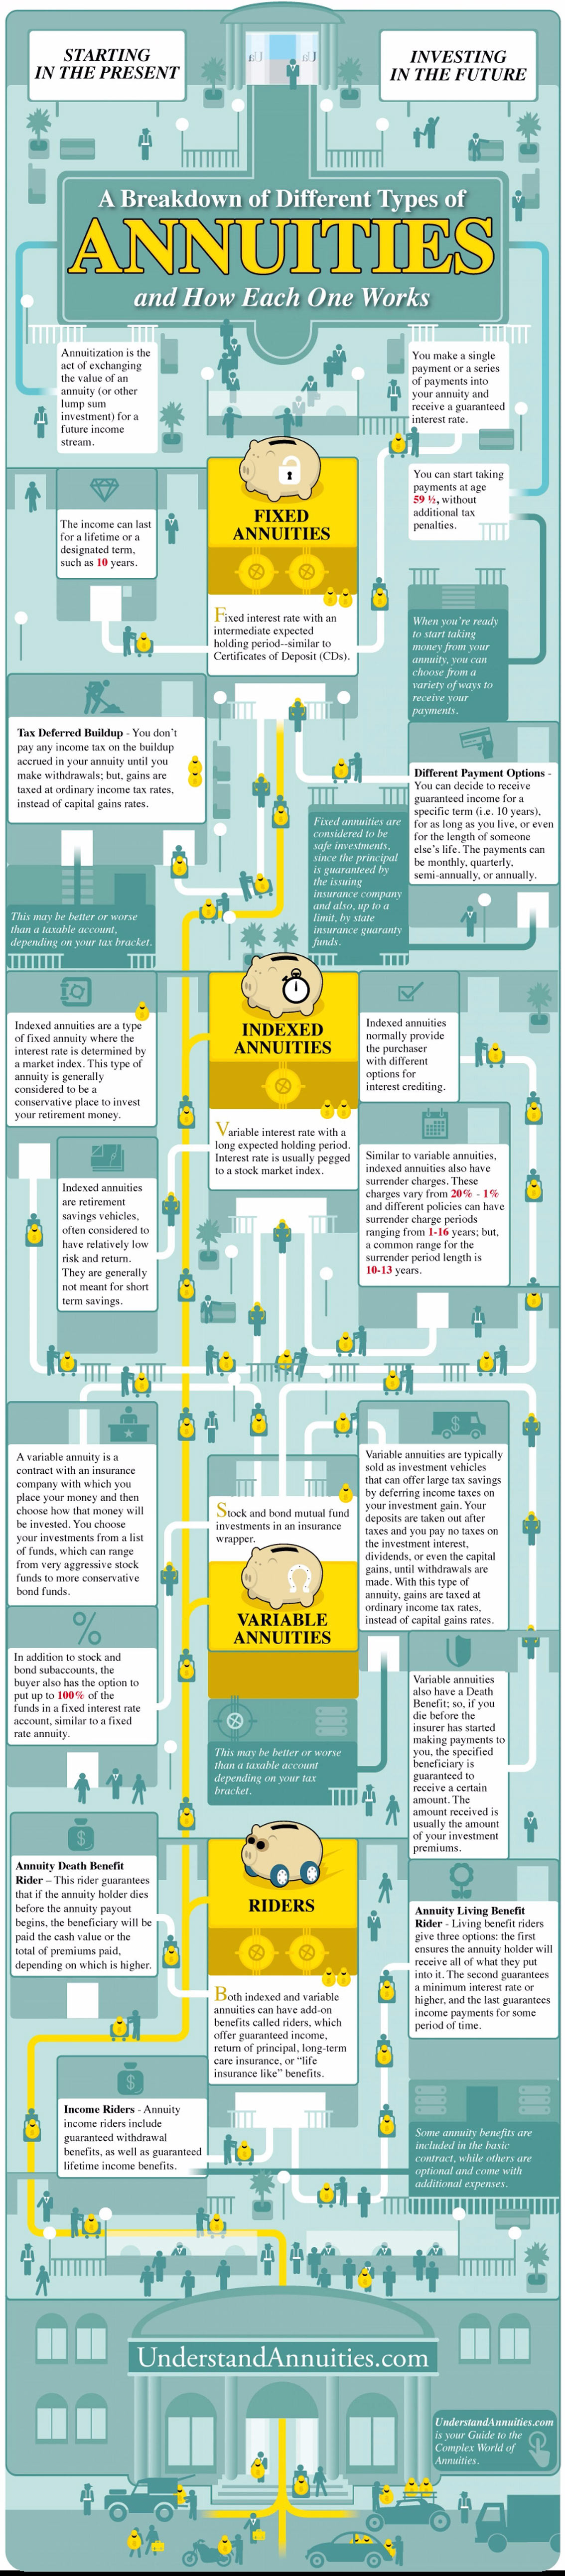 How the Different Types Of Annuities Works Infographic